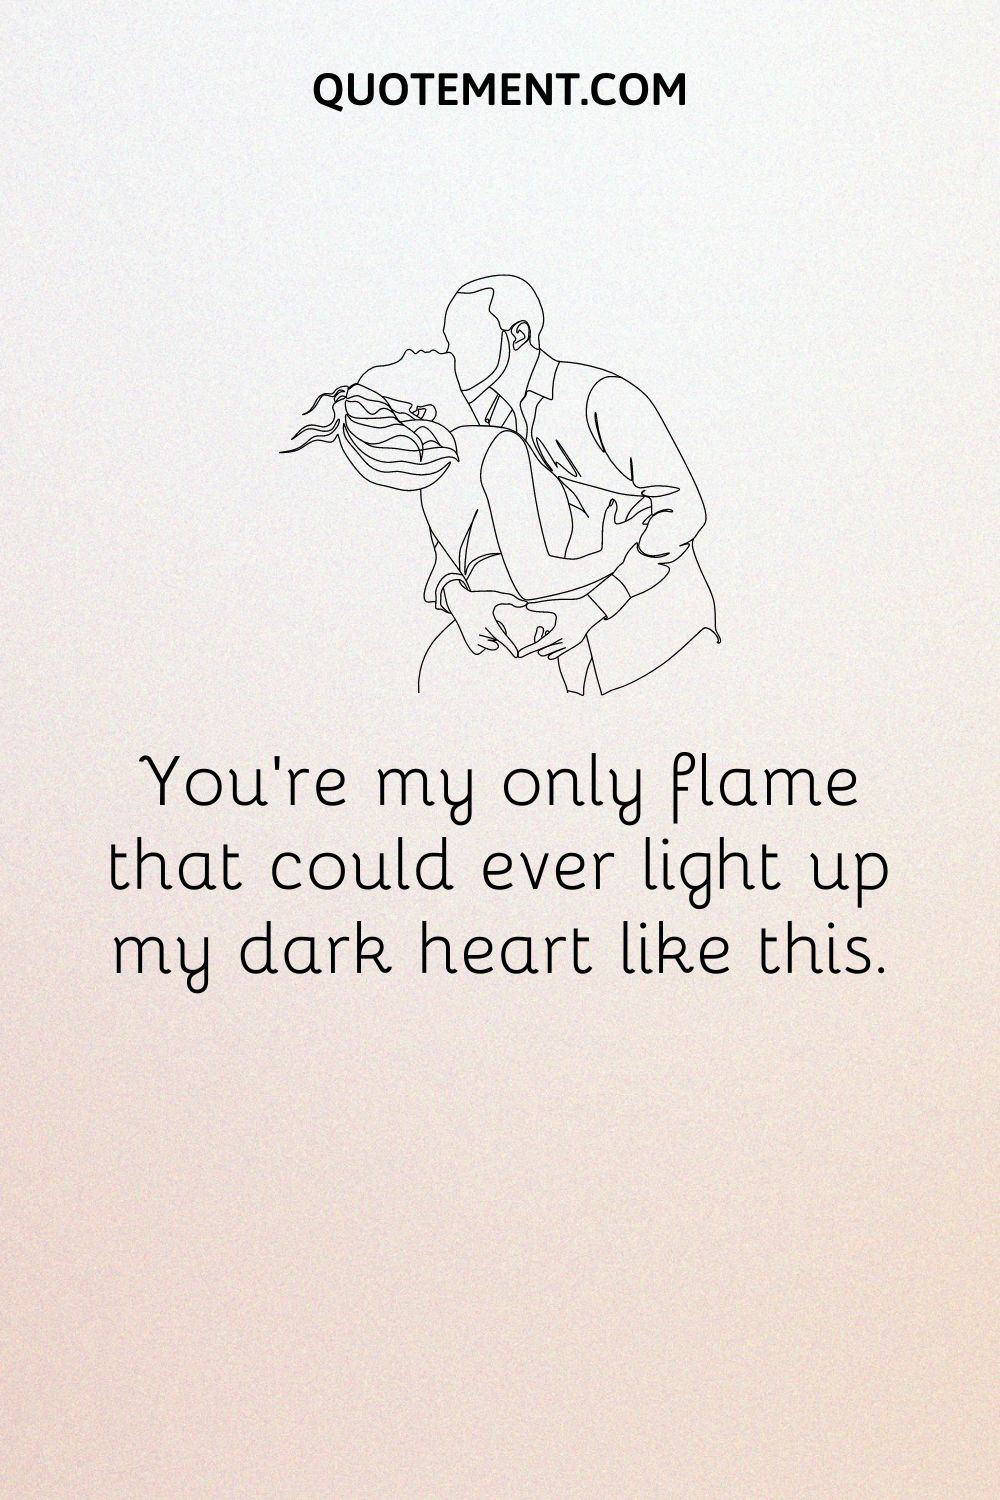 You’re my only flame that could ever light up my dark heart like this